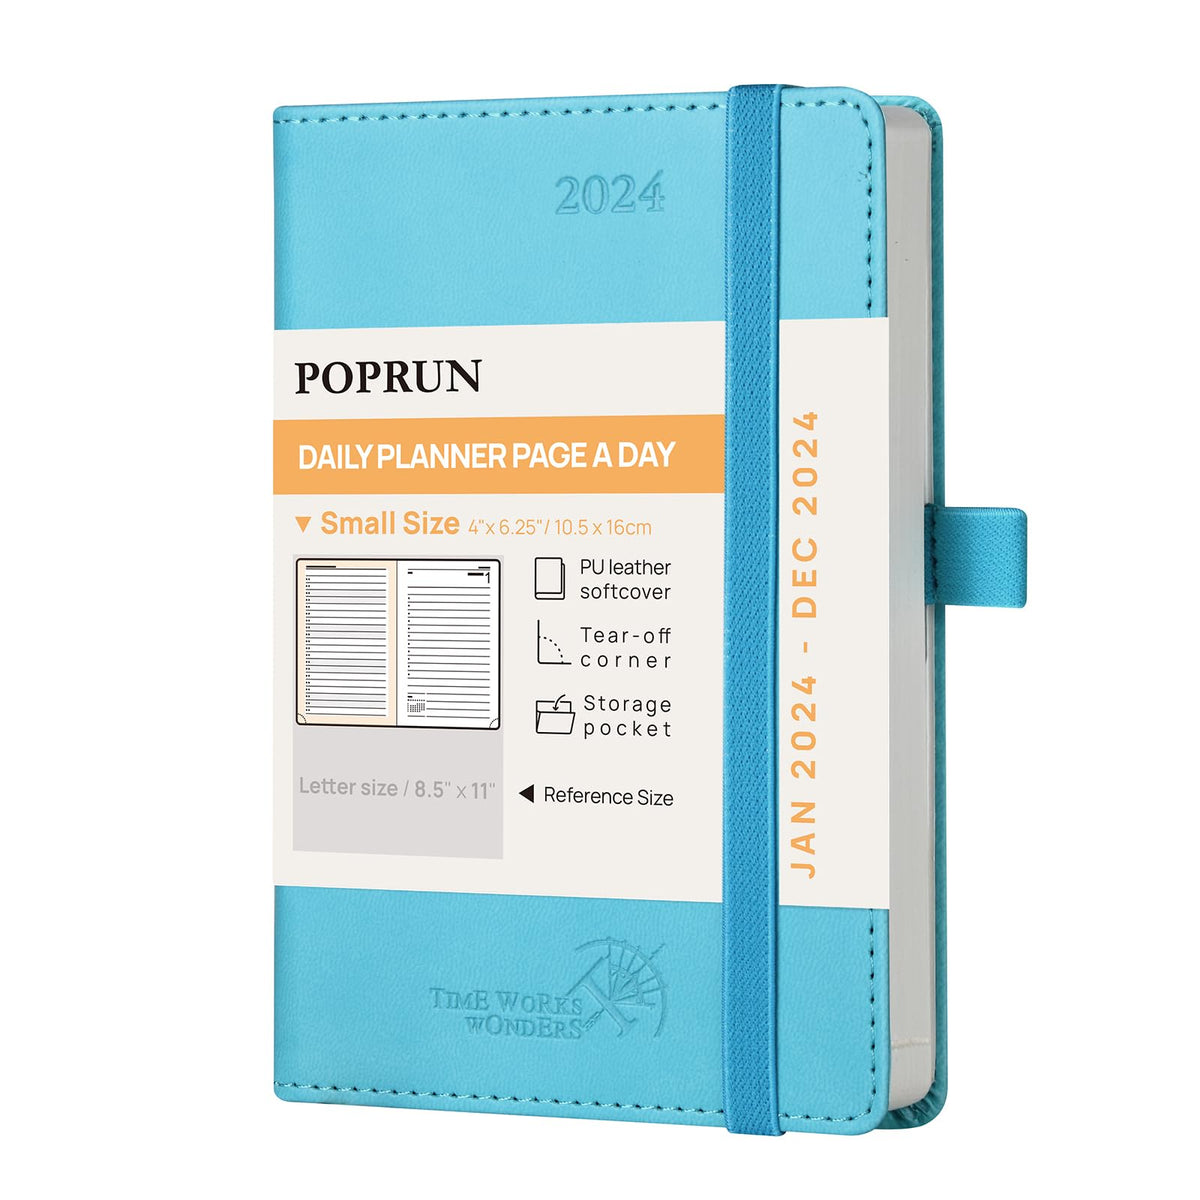 POPRUN A6 Diary 2024 Day Per Page Soft Cover Pocket Appointment Diary, Small Daily Planner 24 Day To Page, Hourly Interval, FSC® Paper - Blue Green